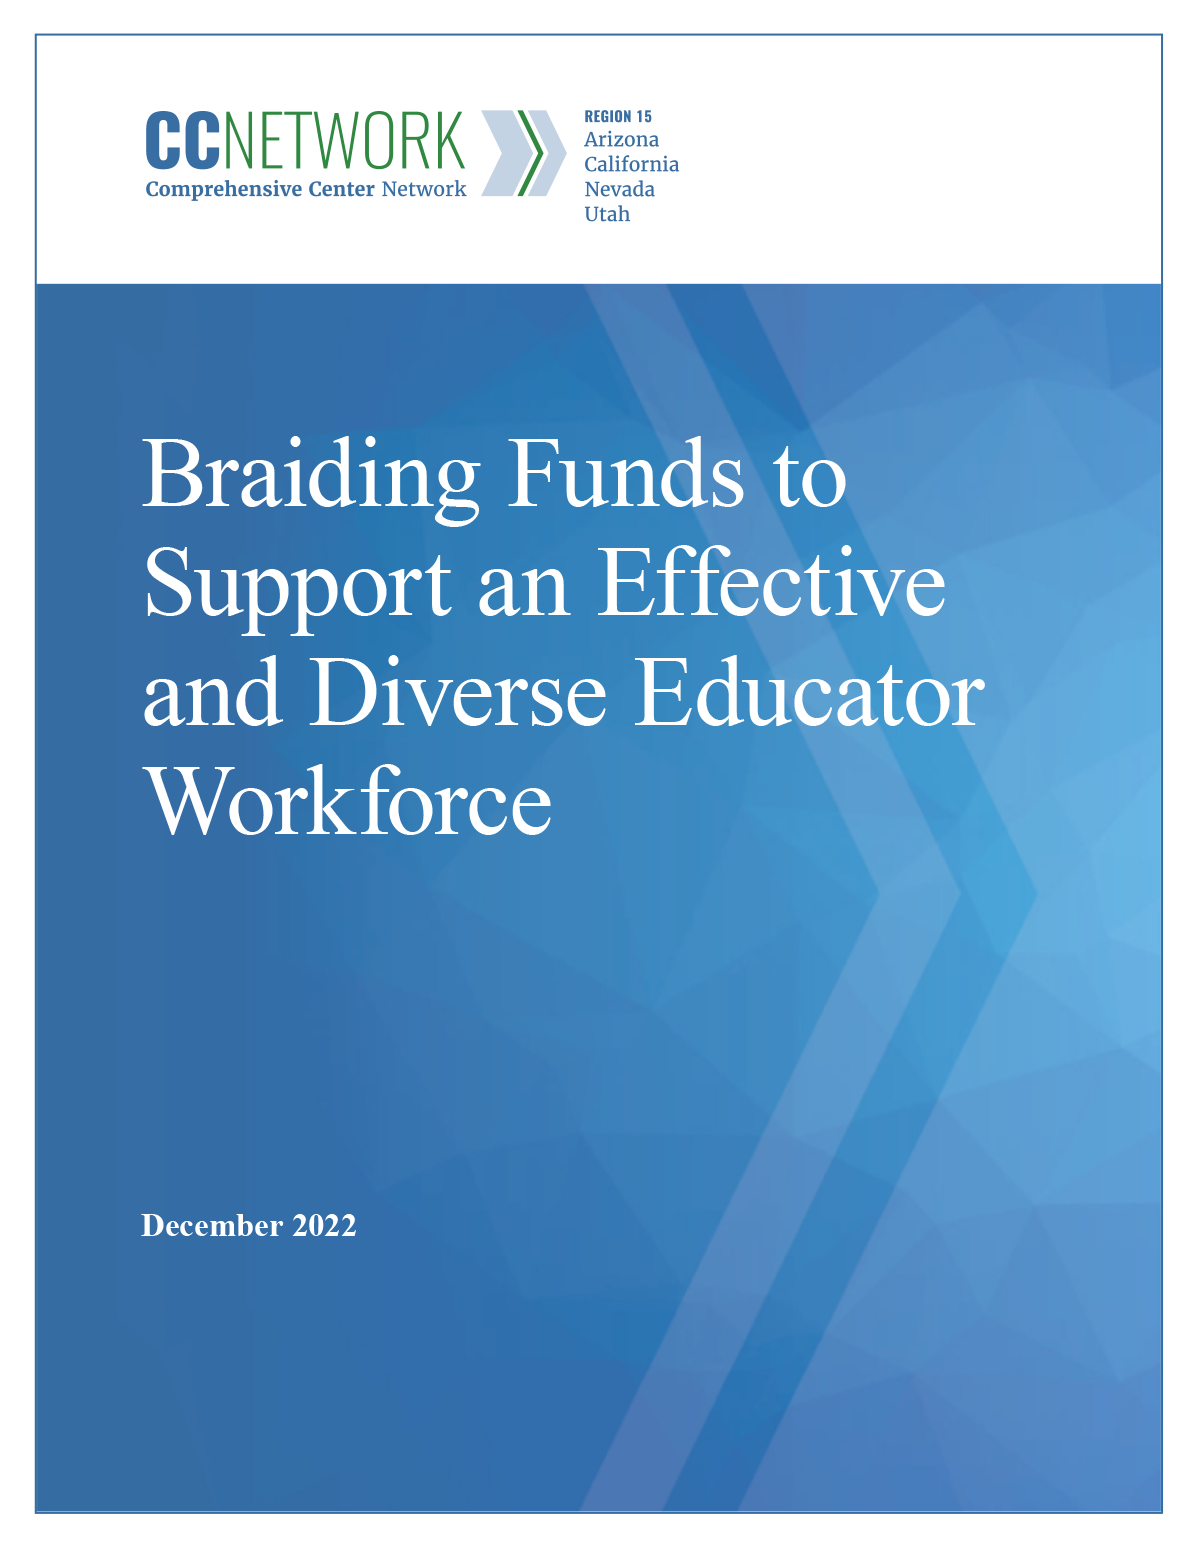 Braiding Funds to Support an Effective and Diverse Educator Workforce